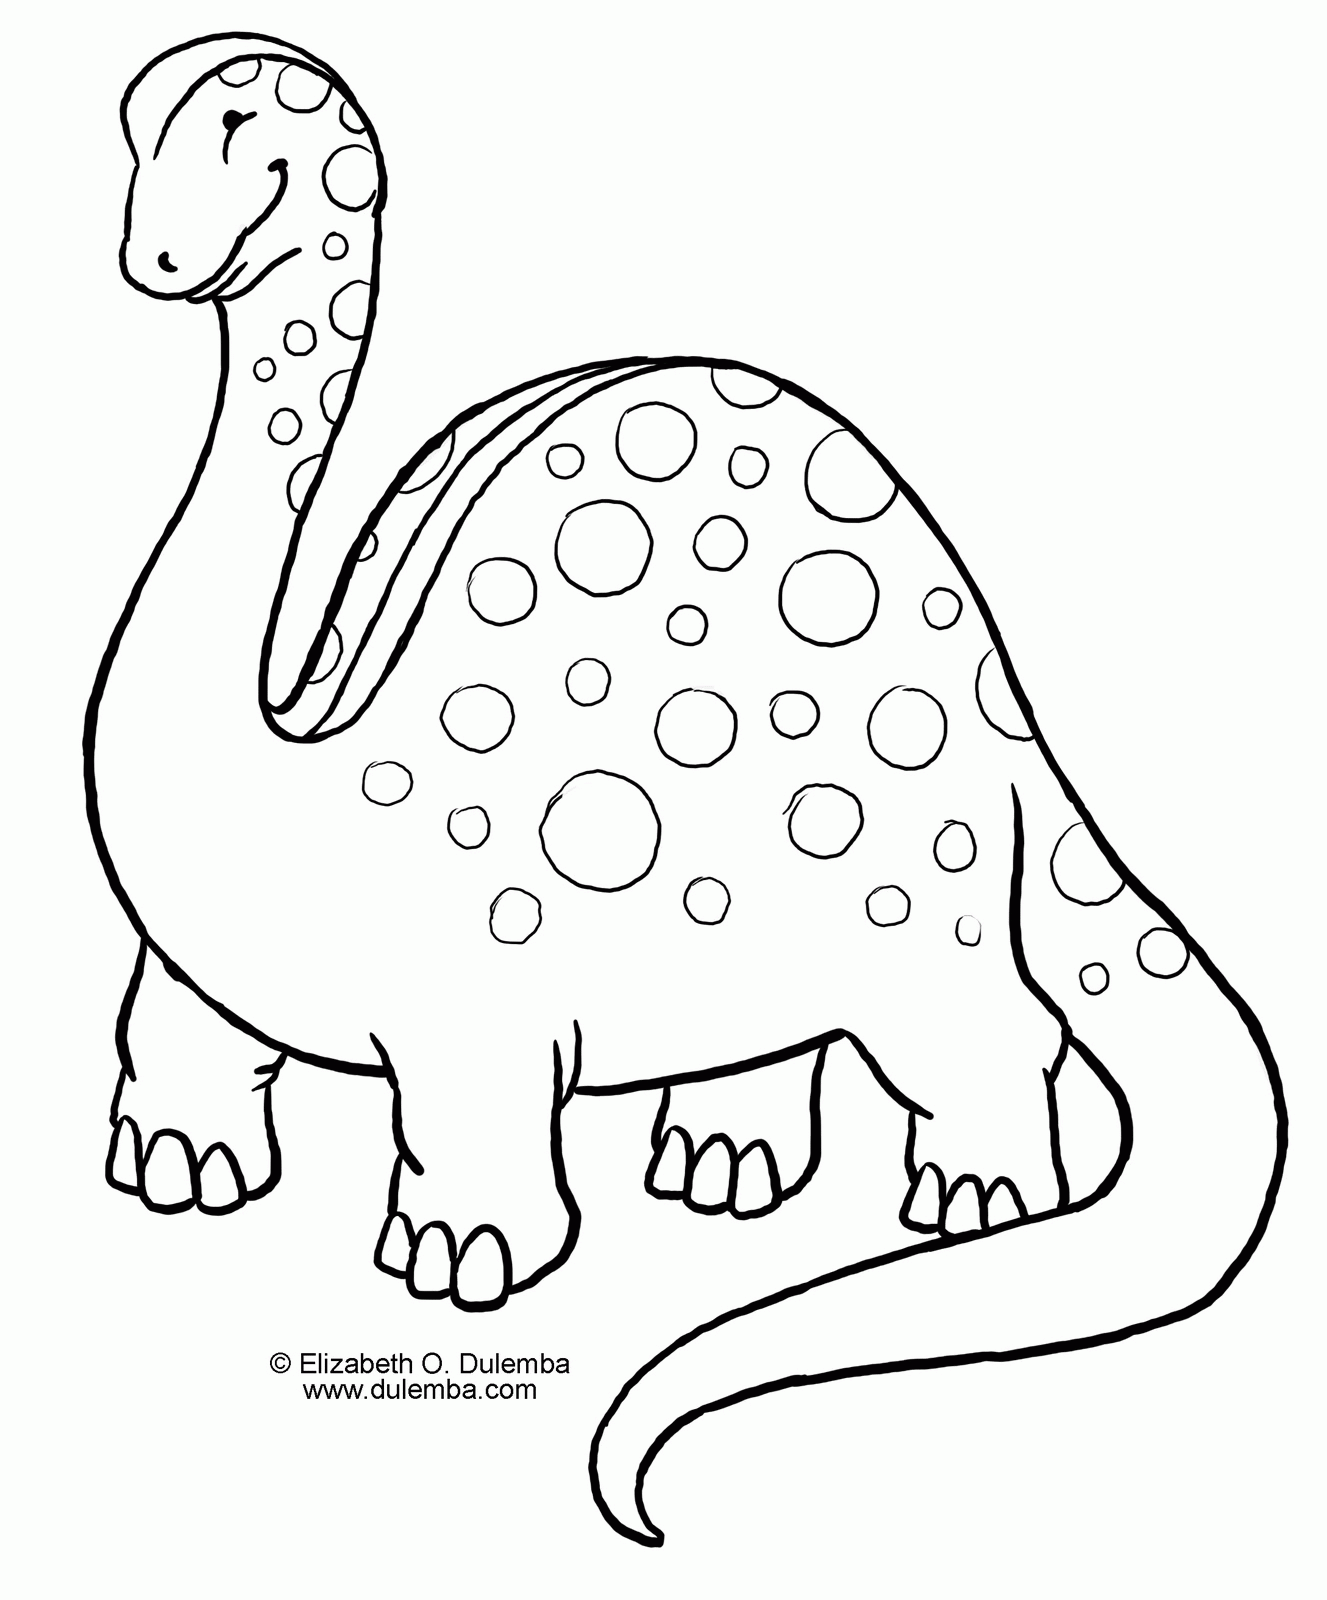 free printable dinosaur coloring pages image 4. dinosaurs coloring ...